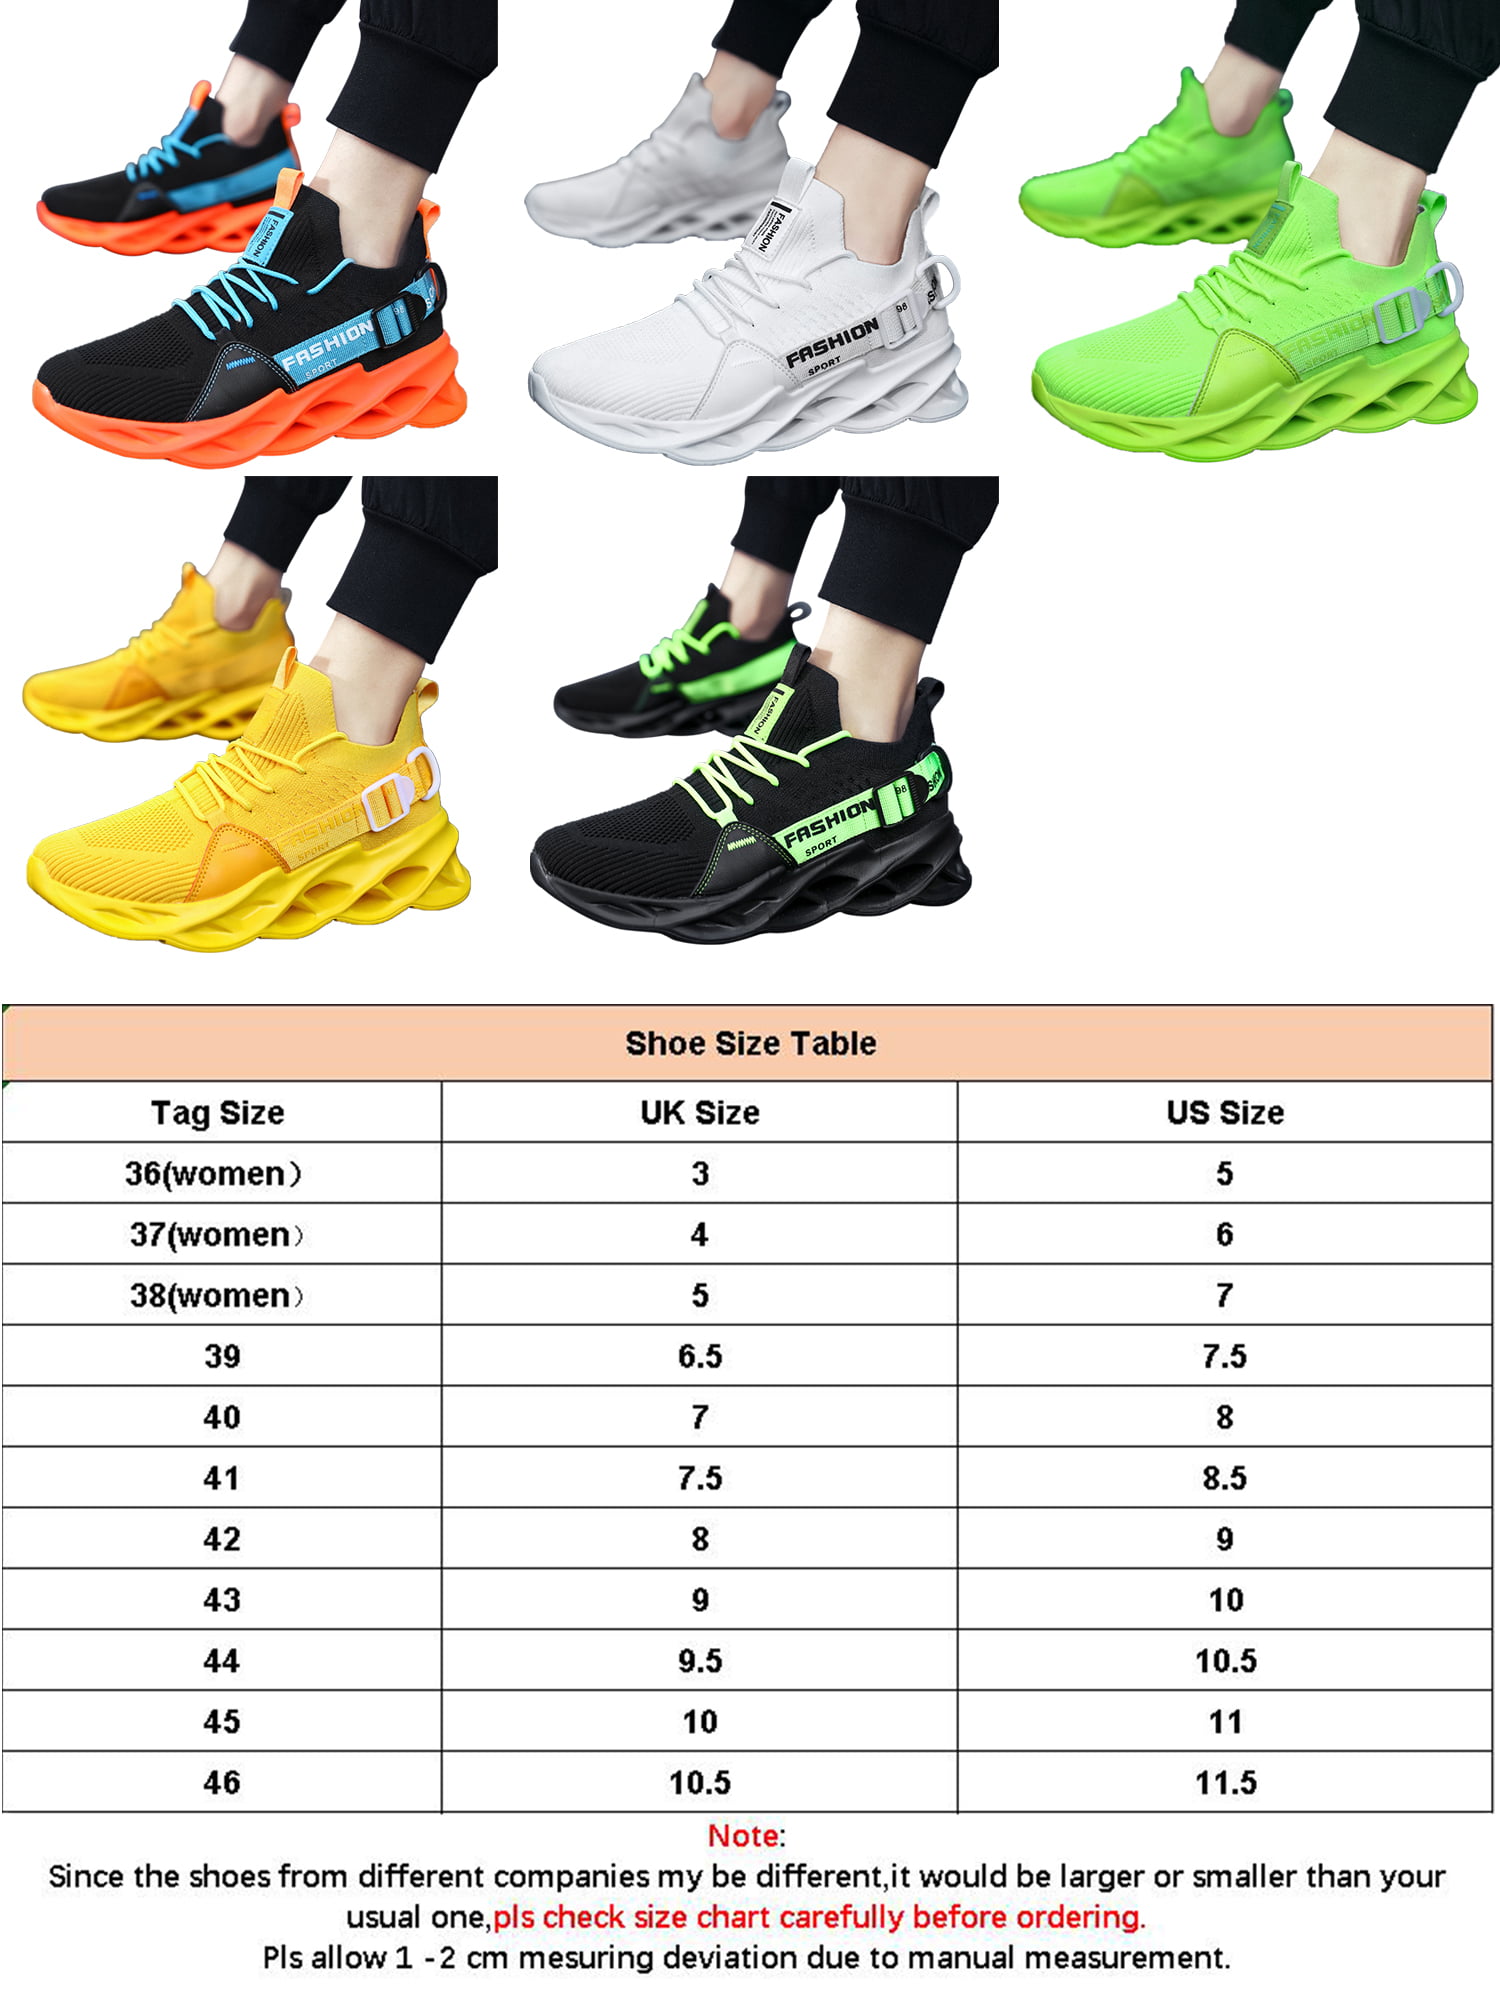 Womens knit Sneakers Casual Jogging Training Running Shoes Athletic size US5-11 